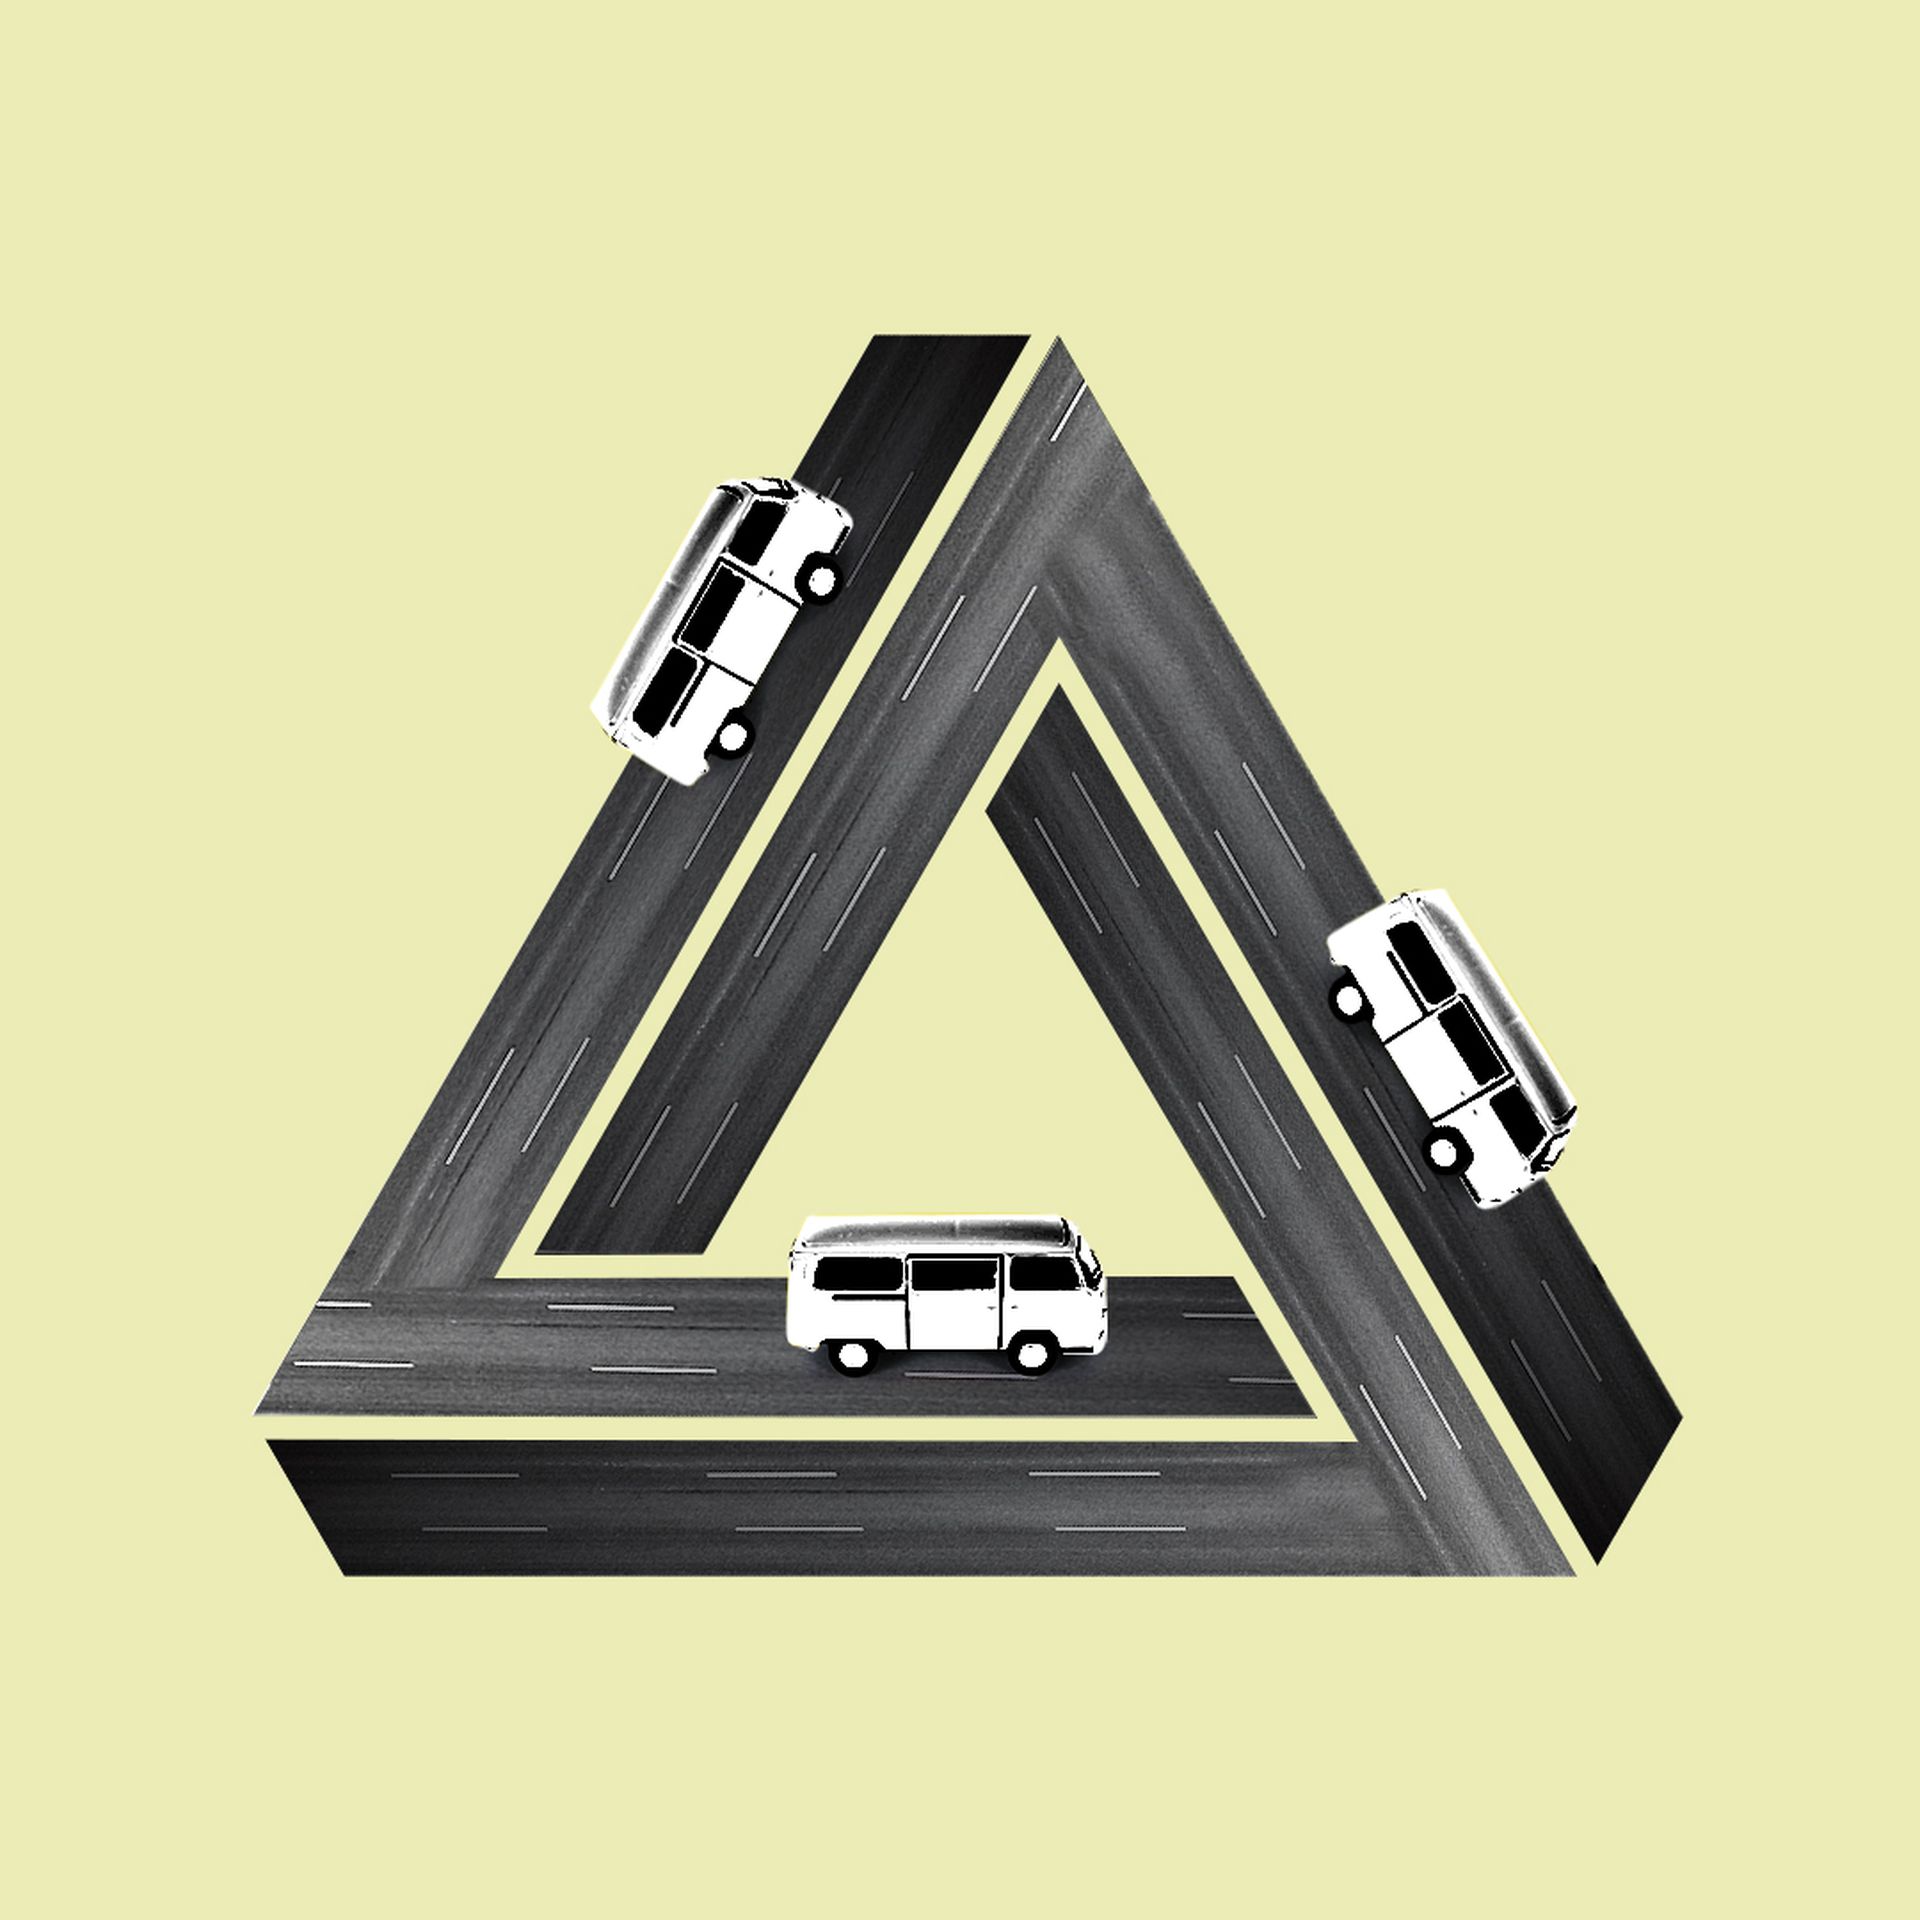 Illustration of roads in the shape of a penrose triangle